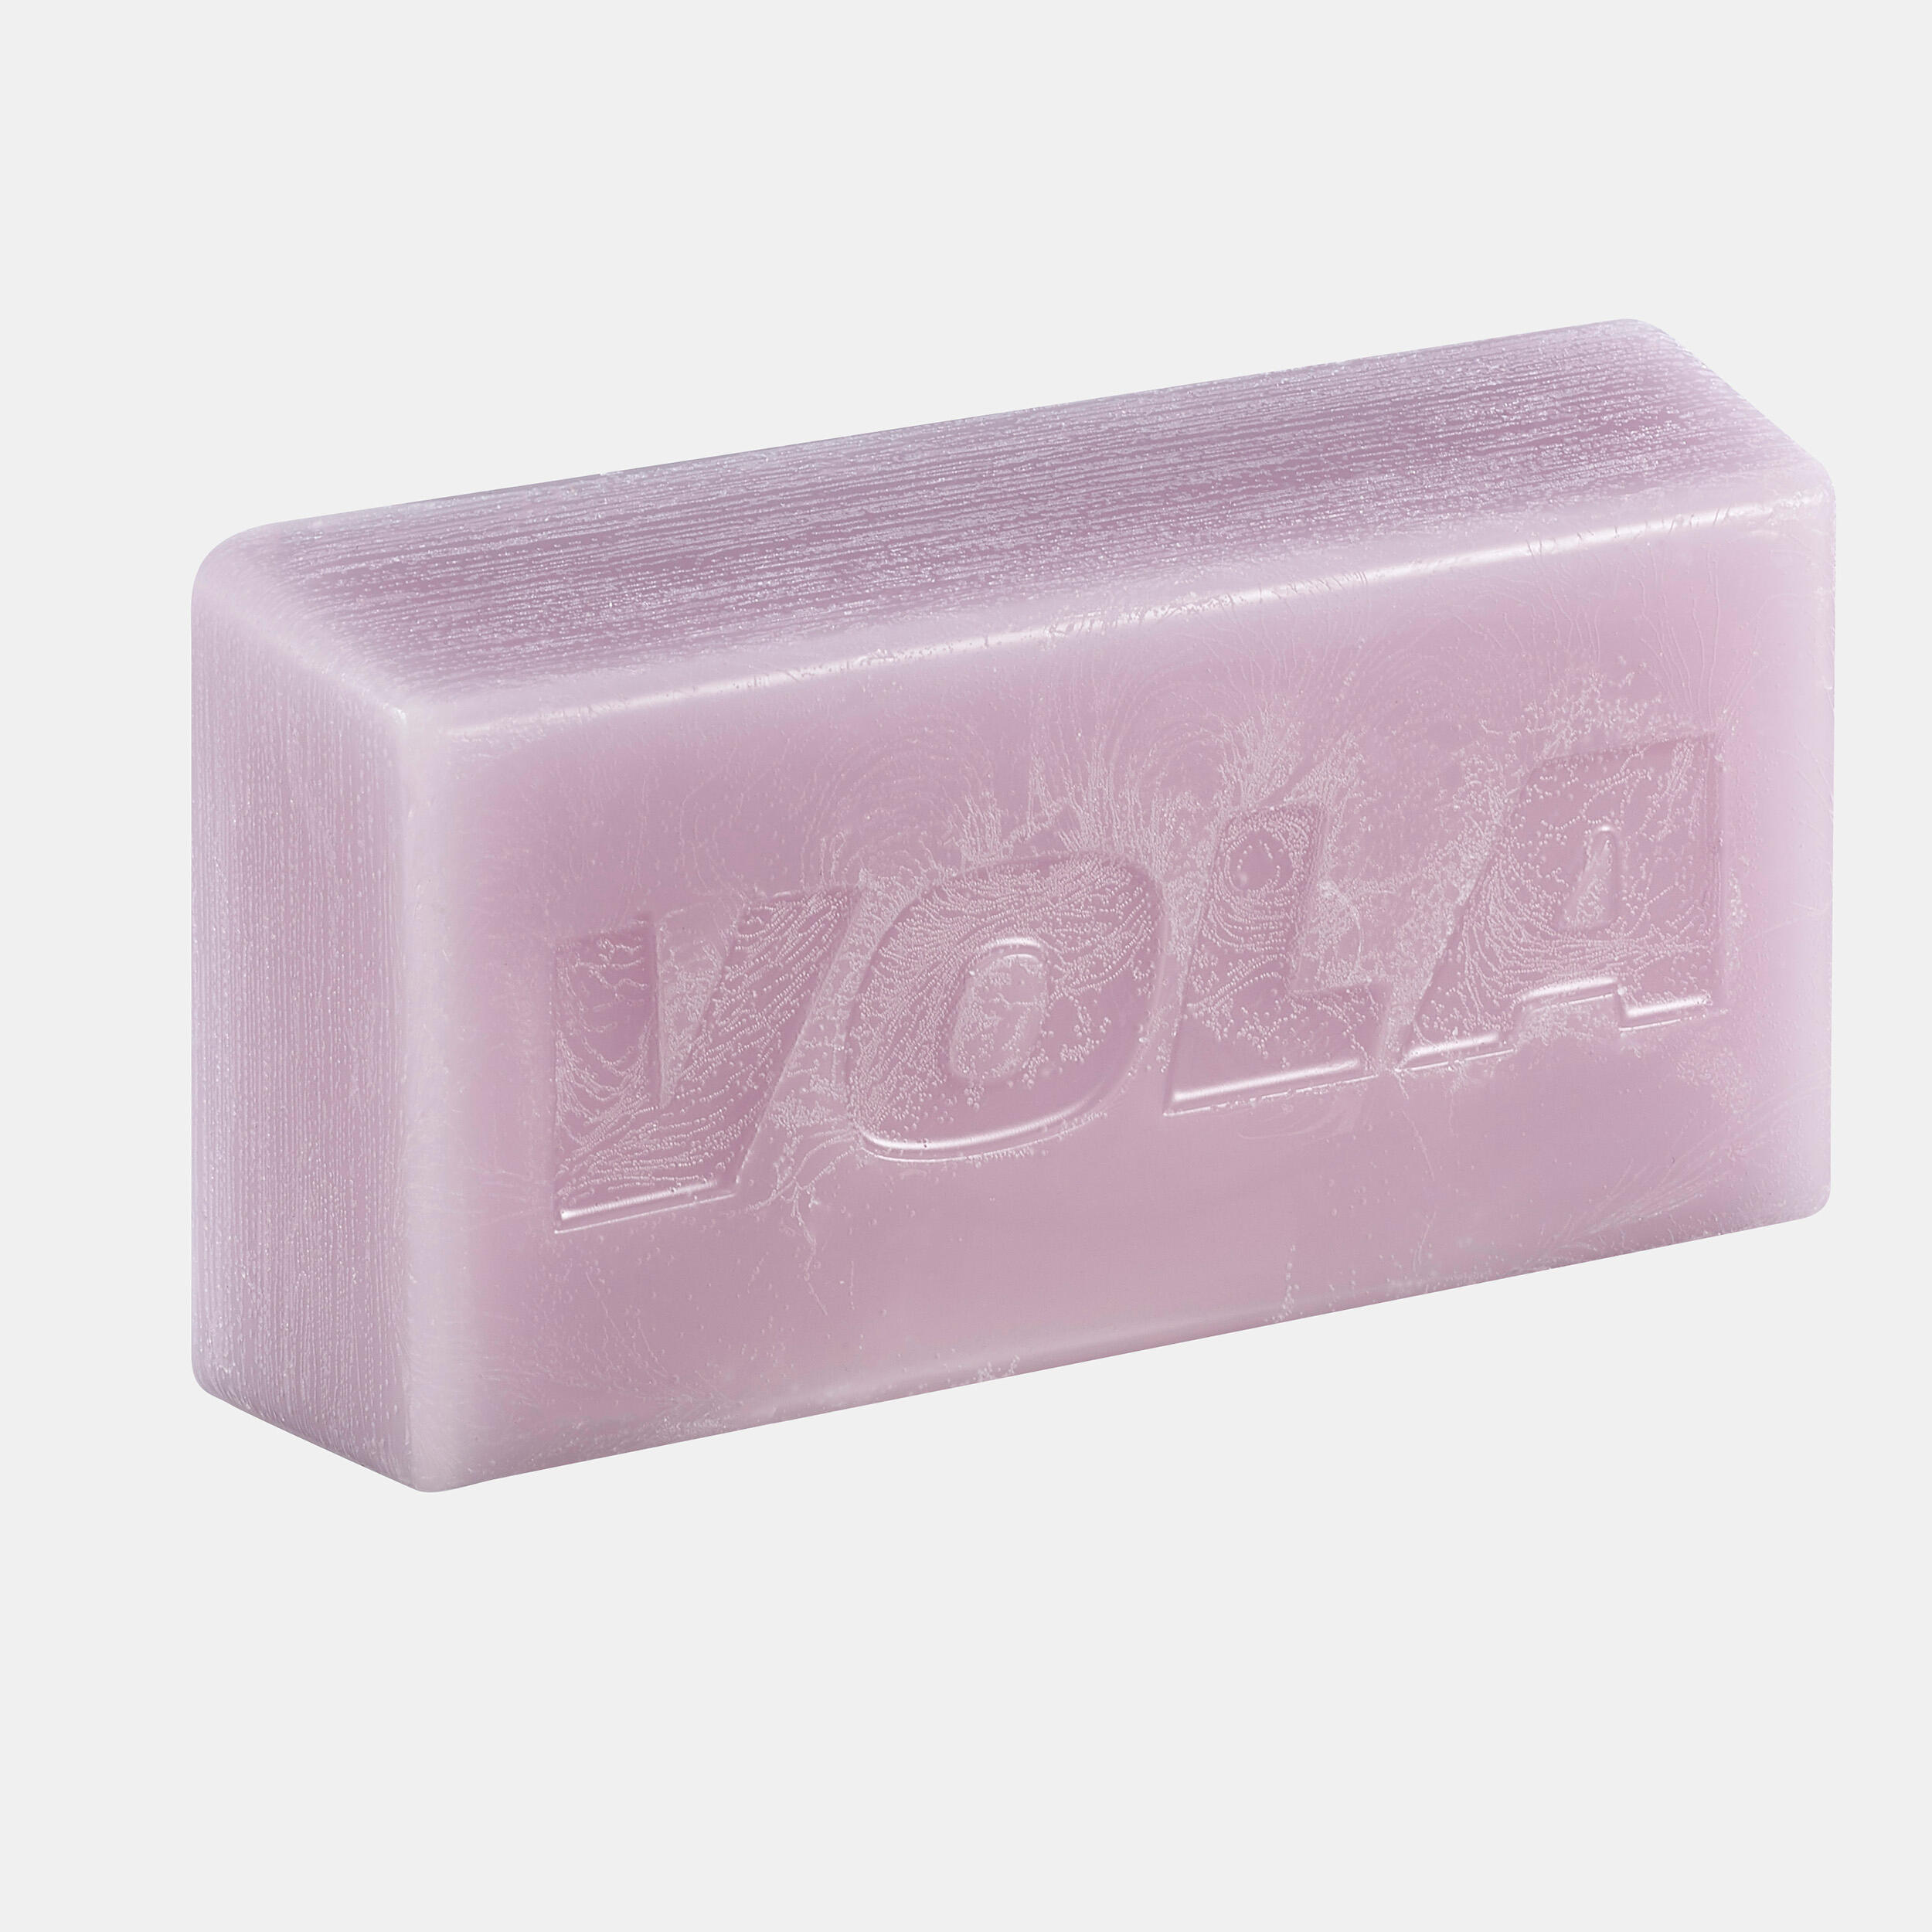 VOLA WAX MX901 200 g Vola base wax for skis or snowboards.